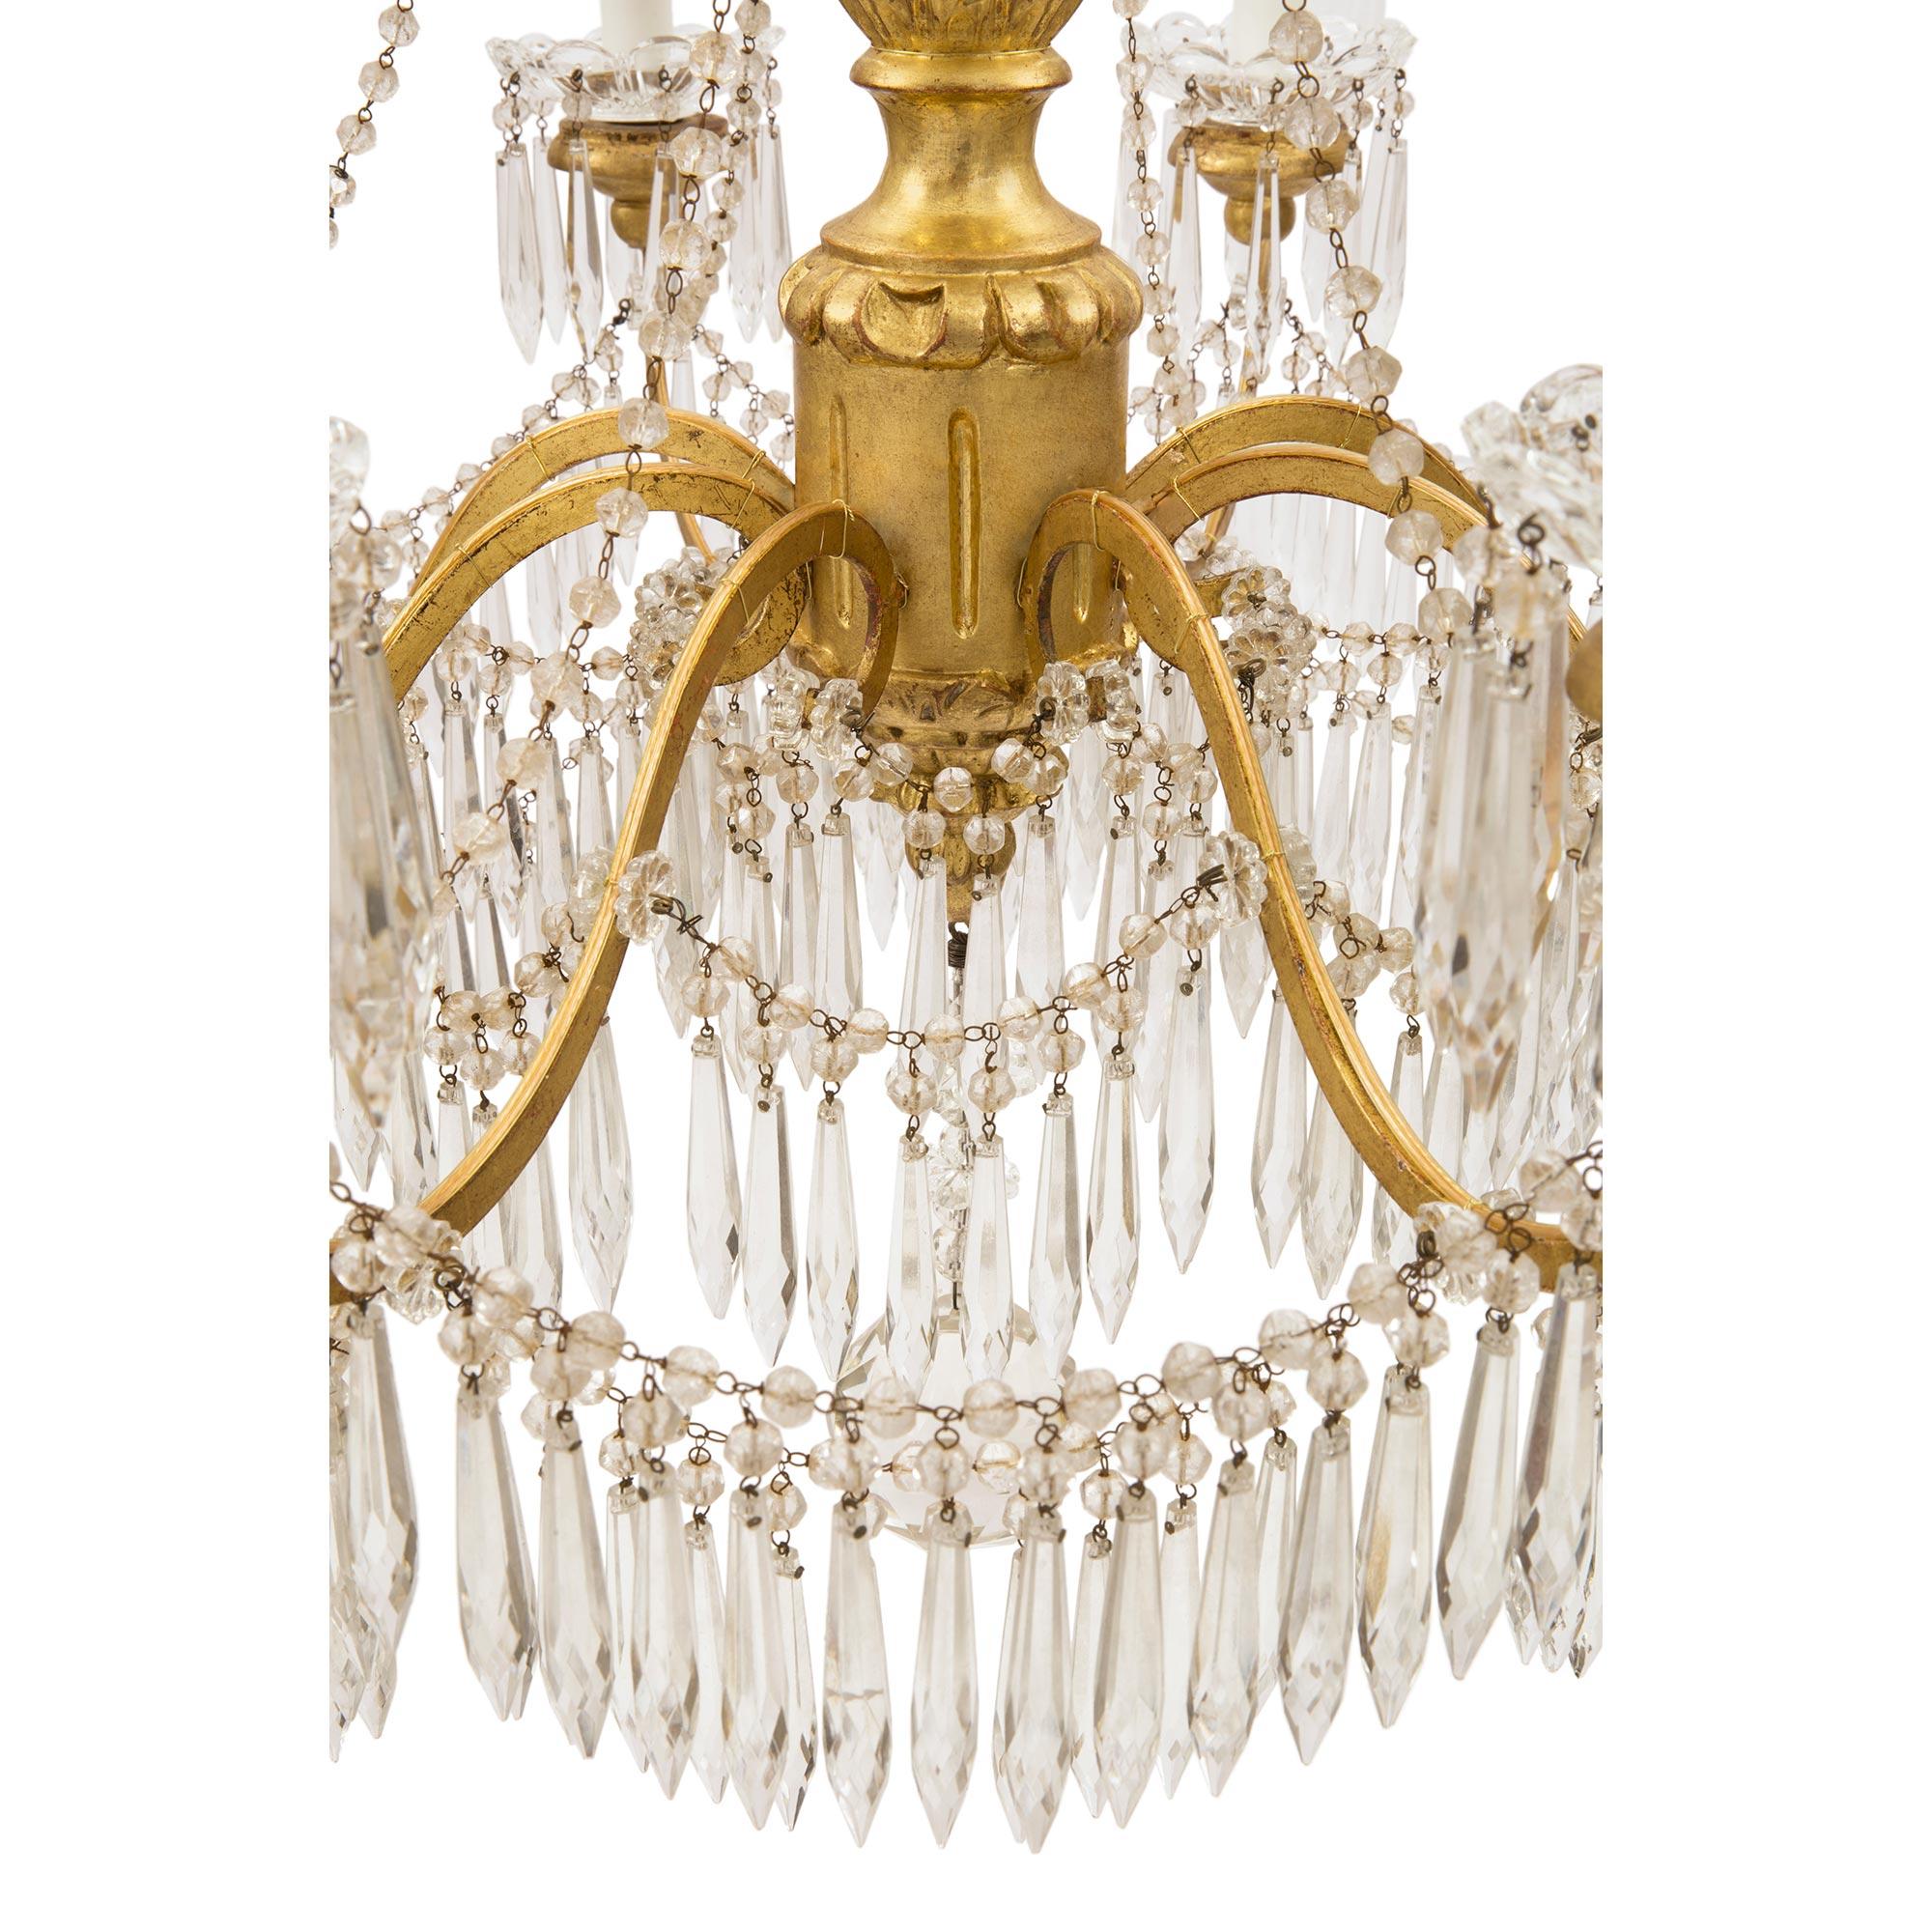 Italian 19th Century Louis XVI Style Giltwood, Metal and Crystal Chandelier For Sale 3